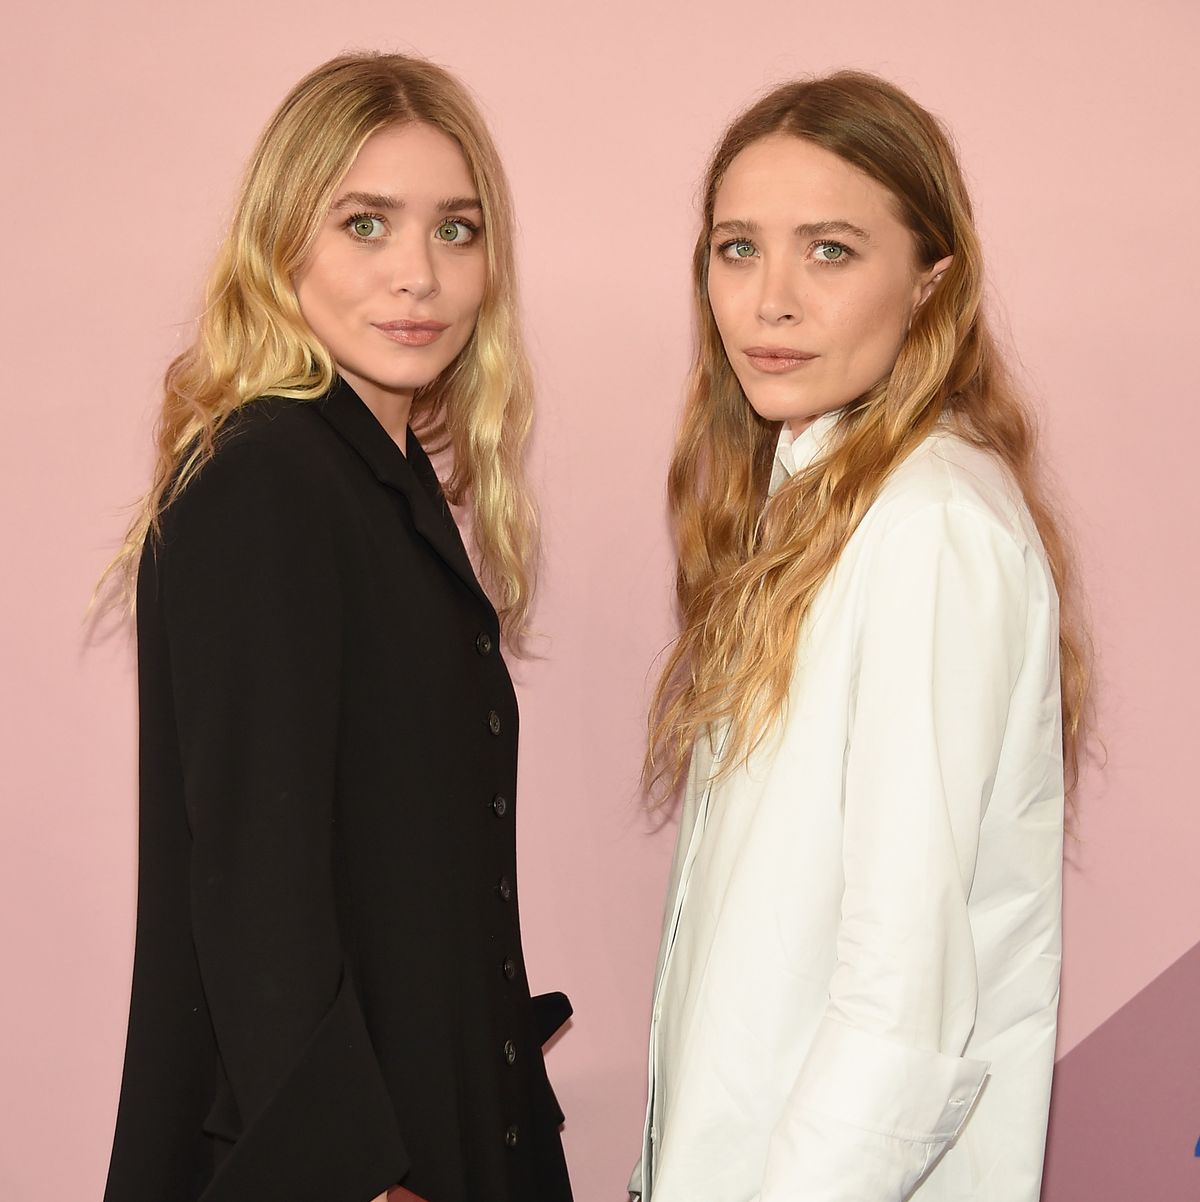 Hjemland fjols transaktion The Olsen's Twins Clothing Label Elizabeth and James is Coming to Kohl's